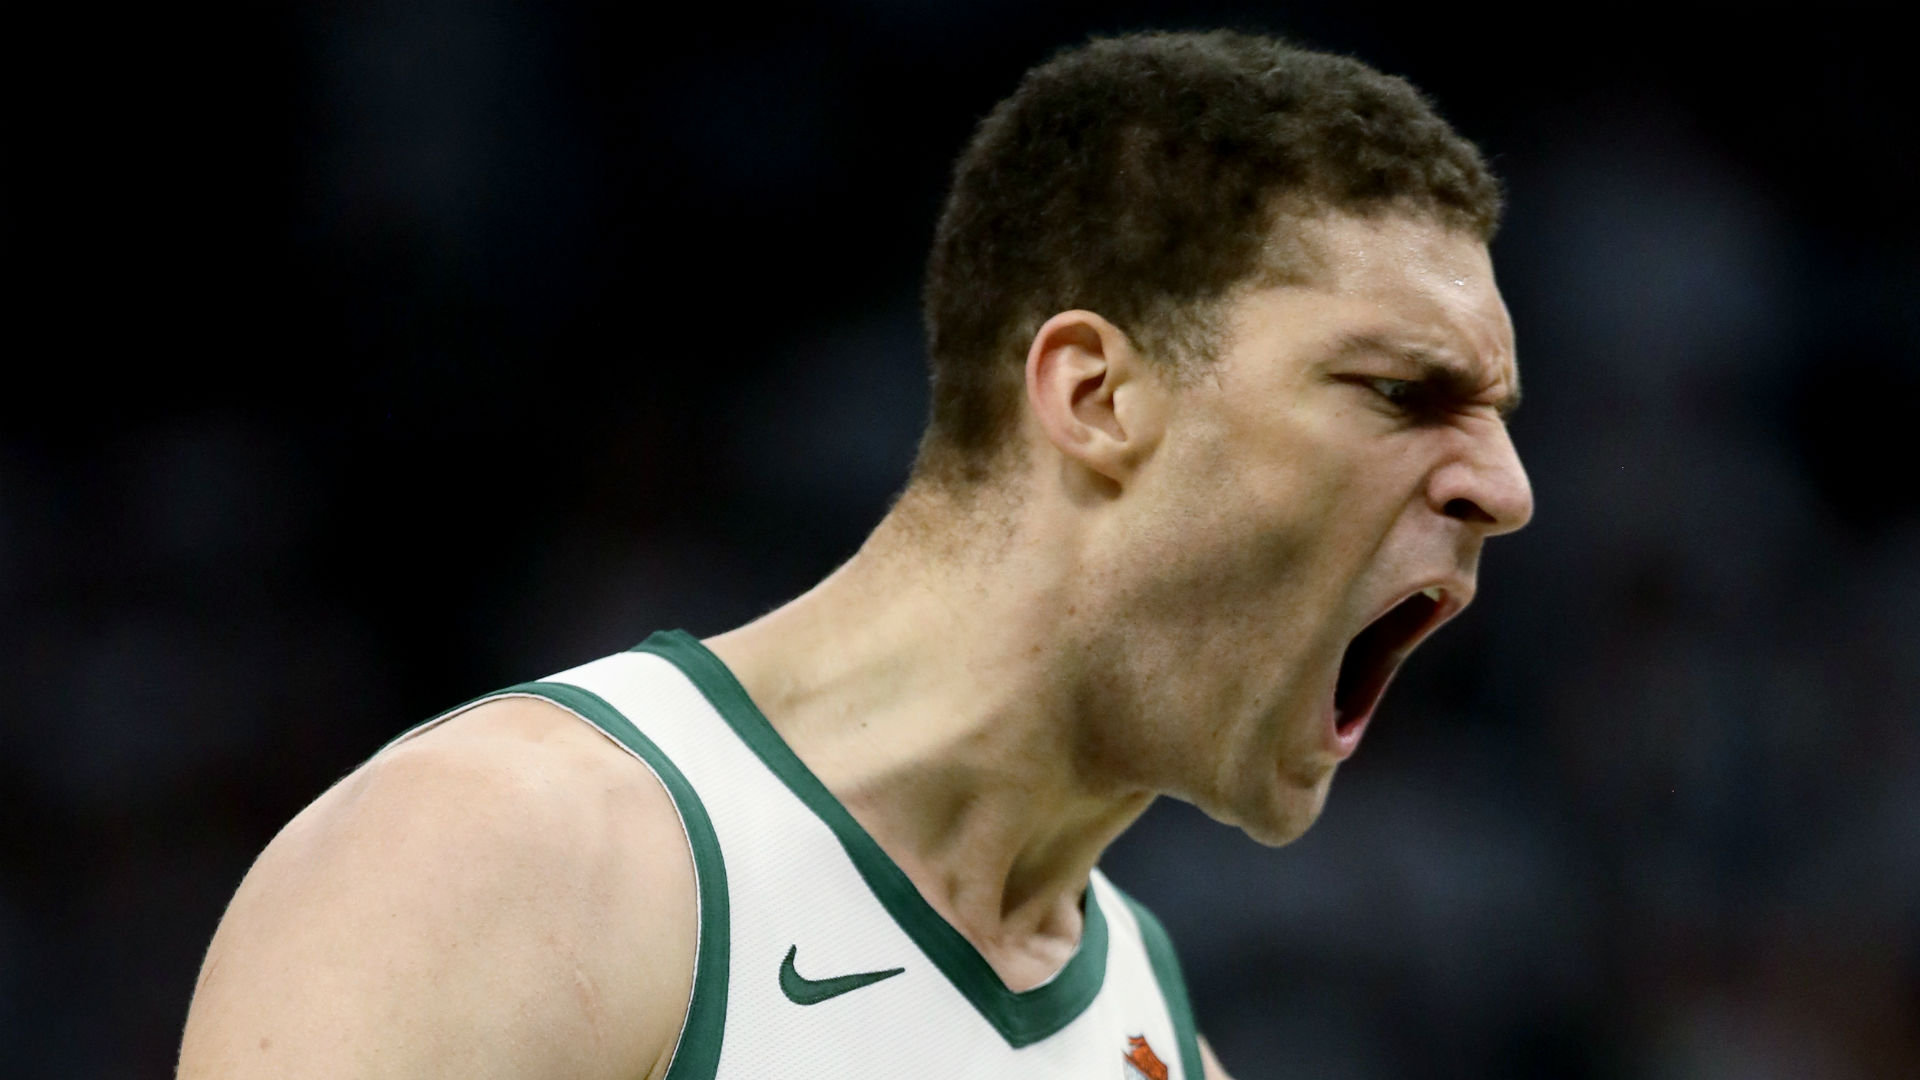 Brook Lopez scored 13 points in the final quarter as the Milwaukee Bucks stormed back to win Game 1 against the Toronto Raptors.